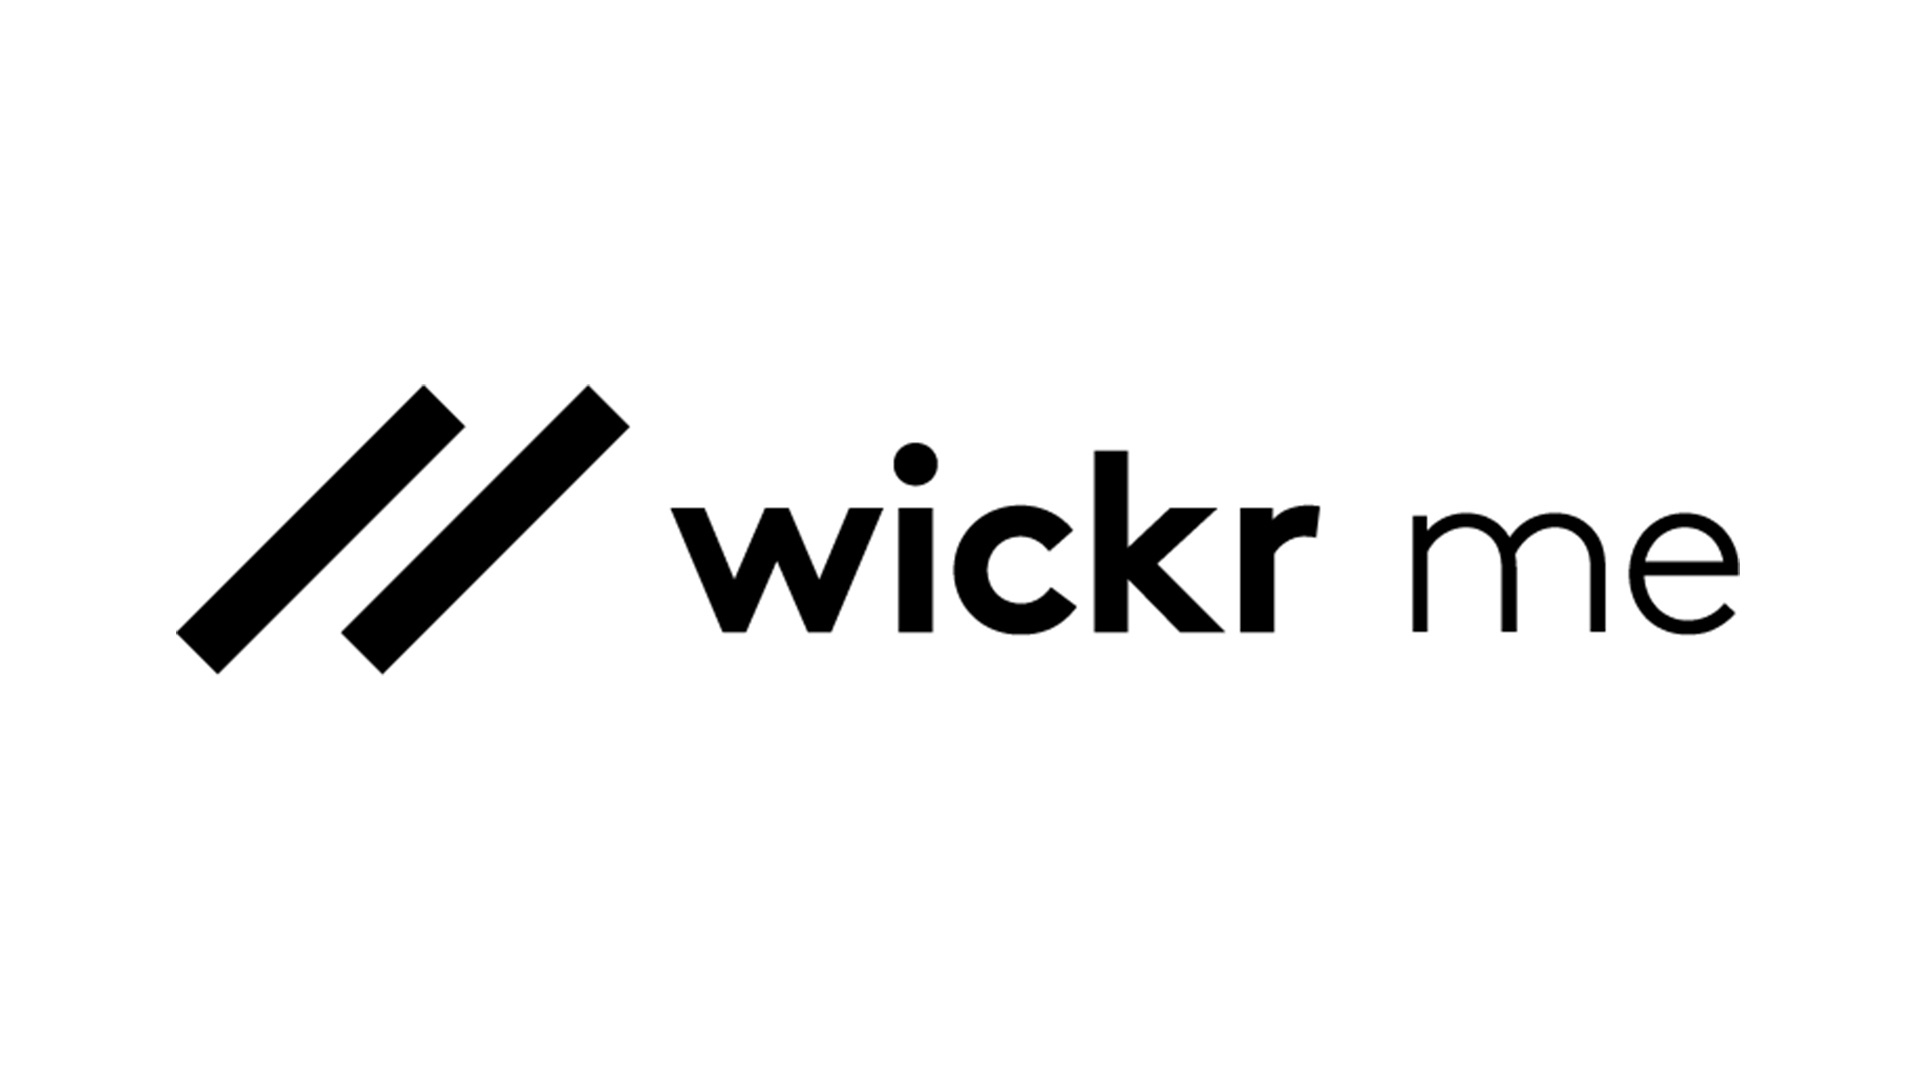 wickrme